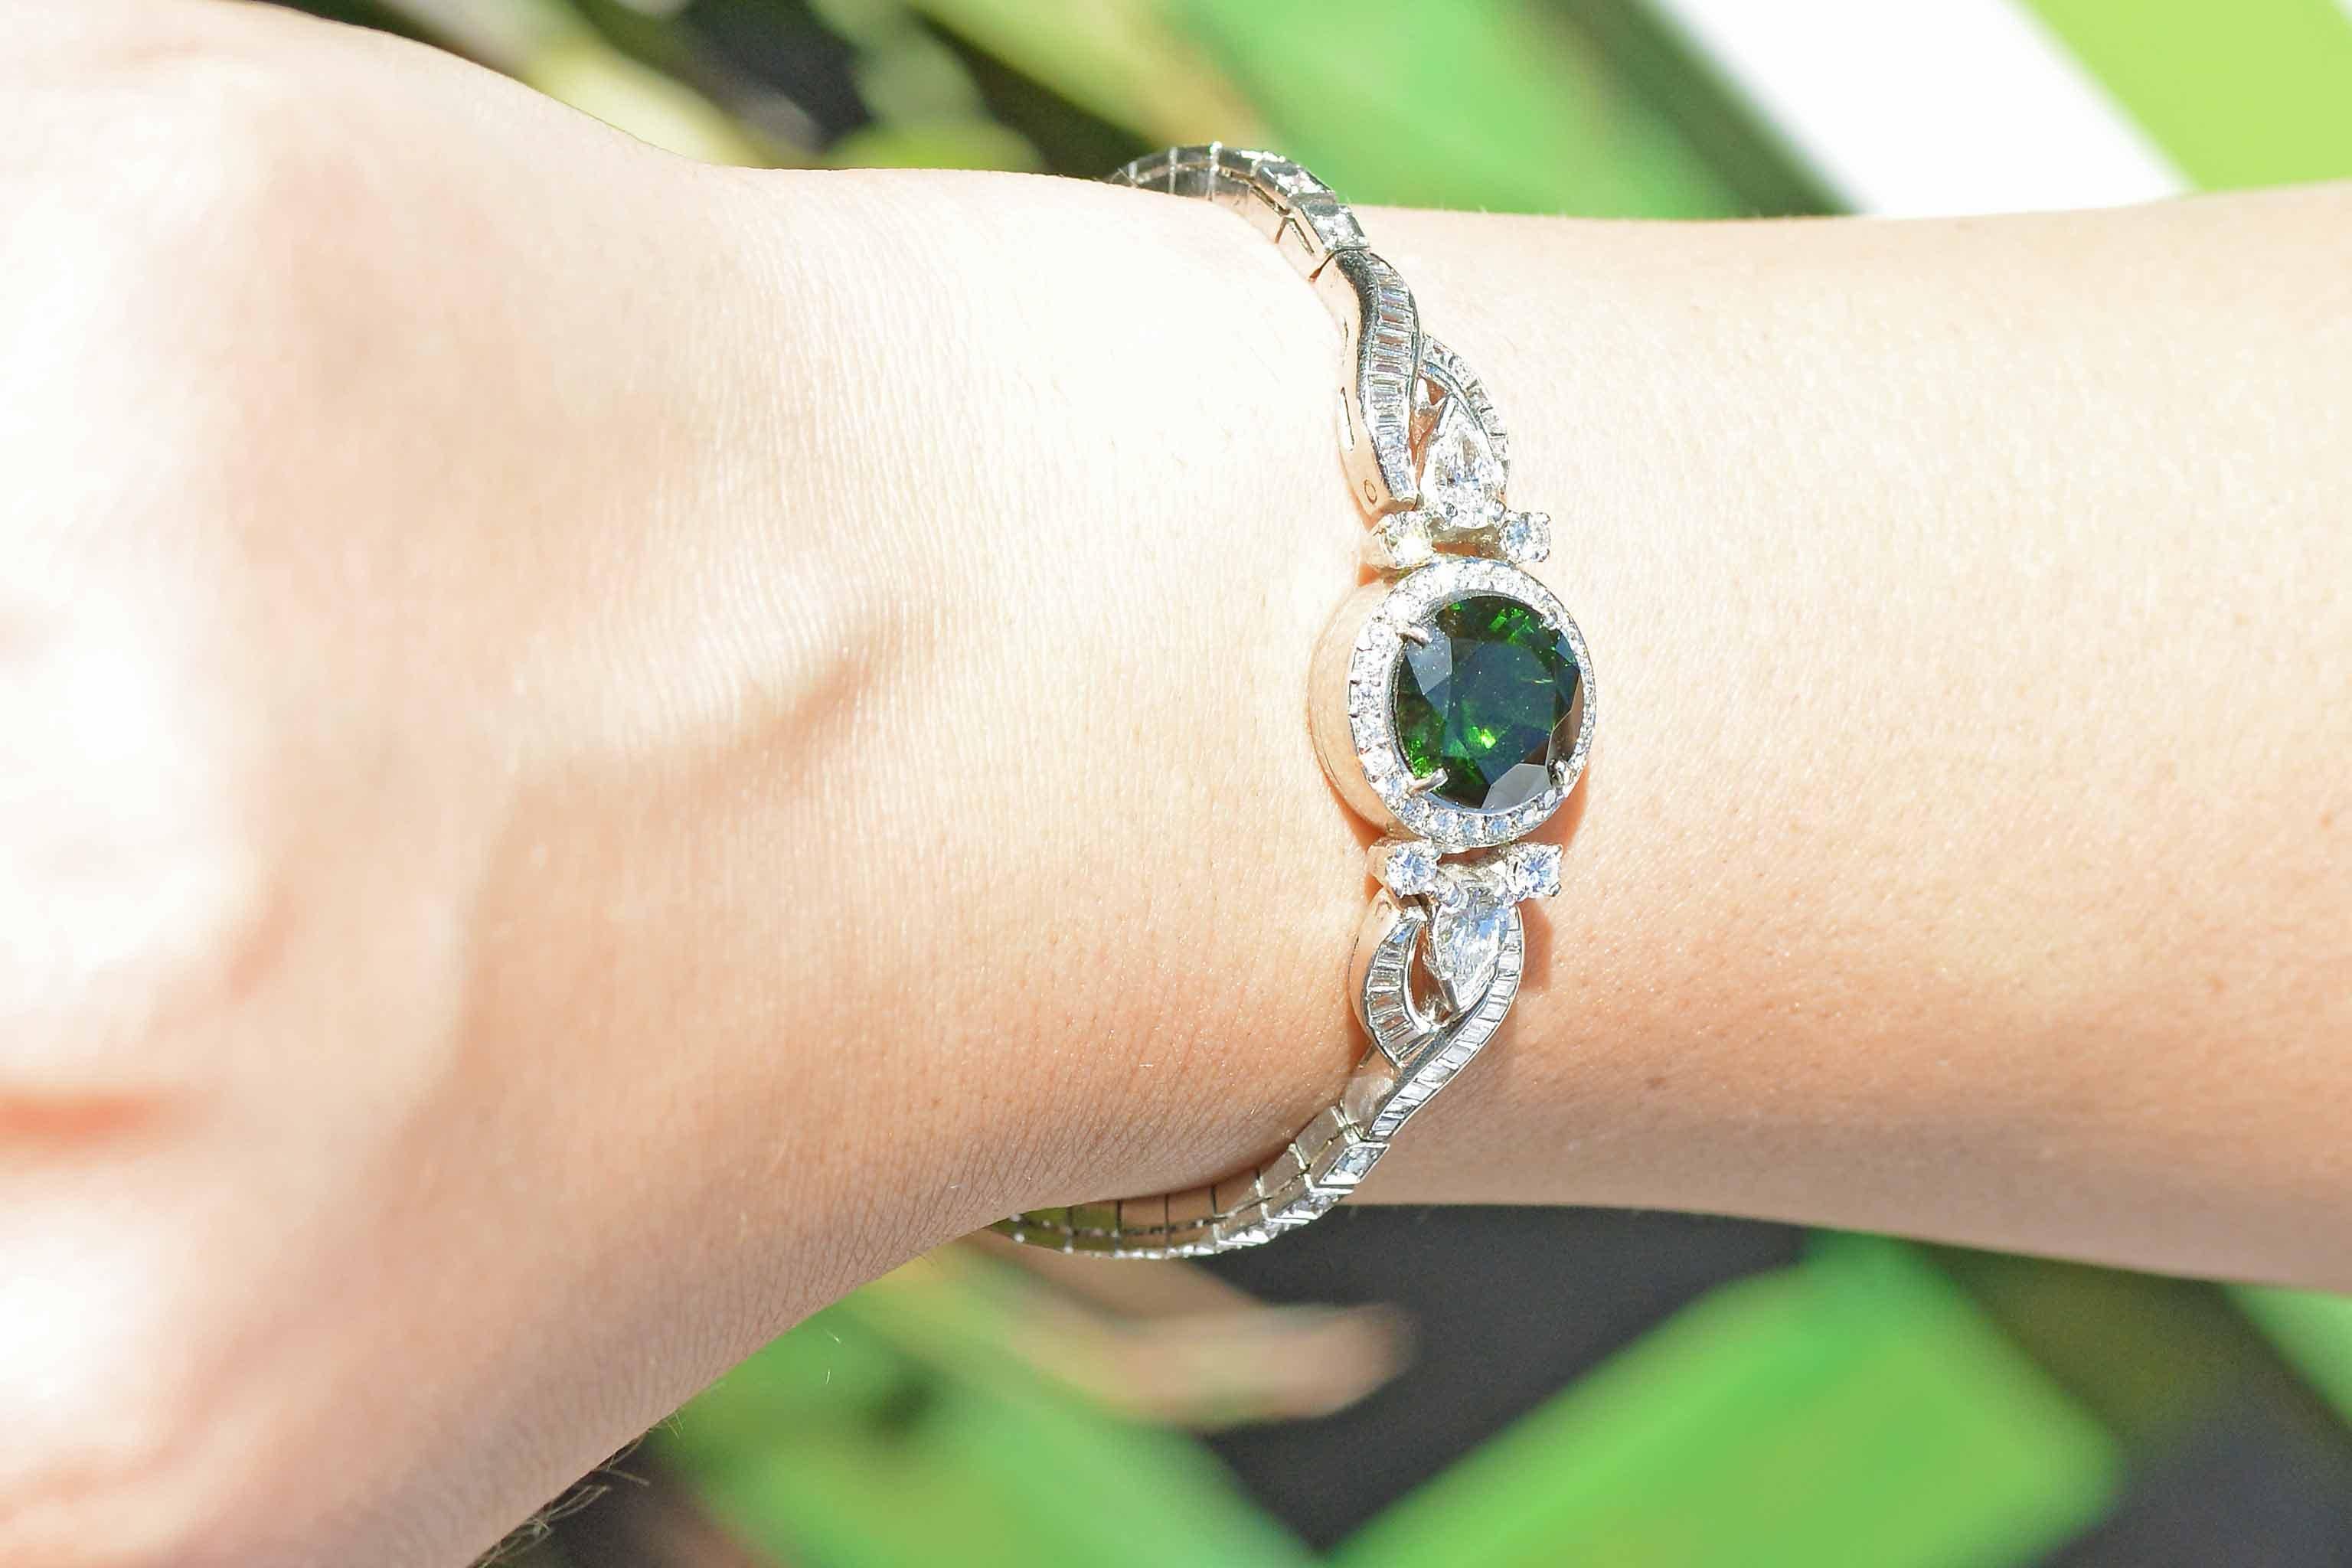 An eye catching and truly one of a kind Art Deco tourmaline bracelet. This exquisite 1920s cocktail jewel centered by a verdant, pine forest green 5.10 carat natural gemstone and is set in a complementary halo of round brilliant and pear cut